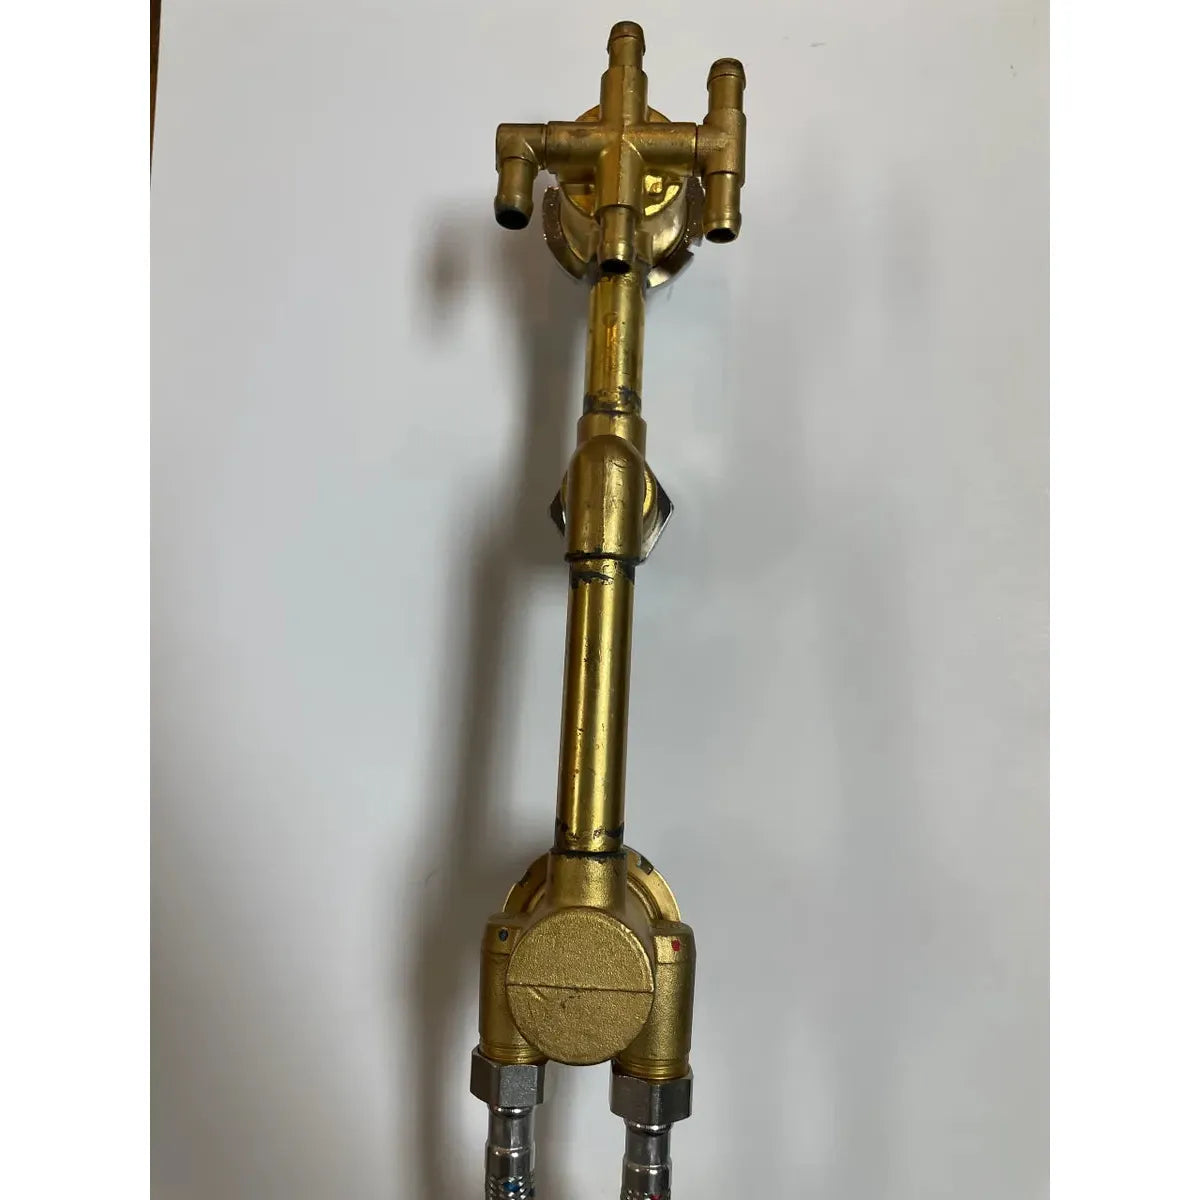 Brass rough assembly for Aquamassage PD-835